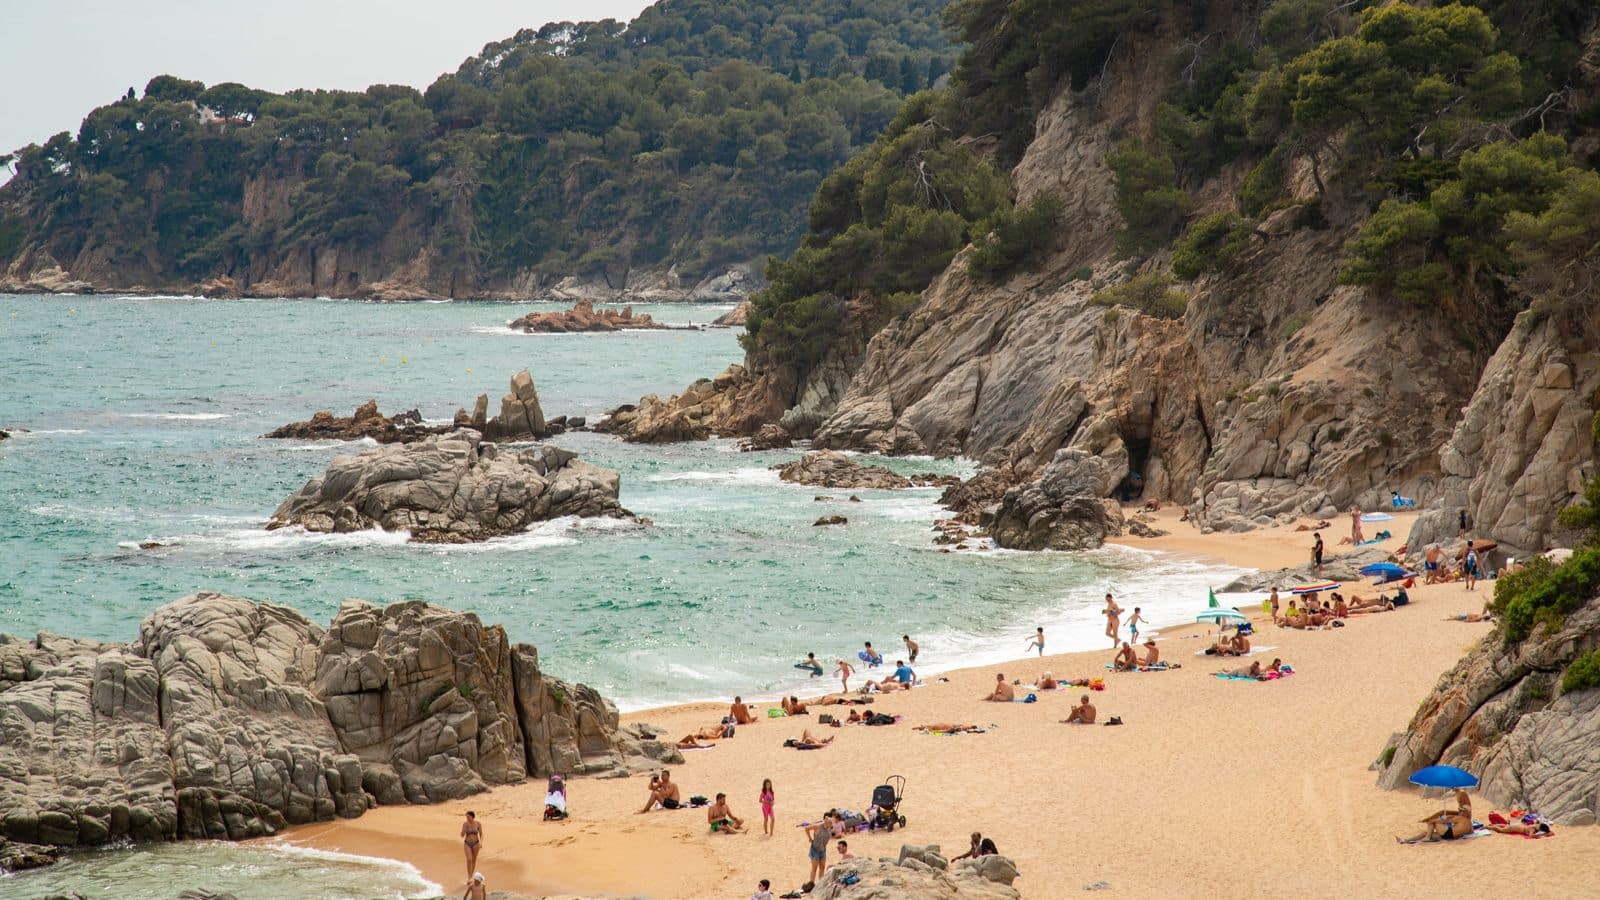 Unwind at Barcelona's secluded beach escapes